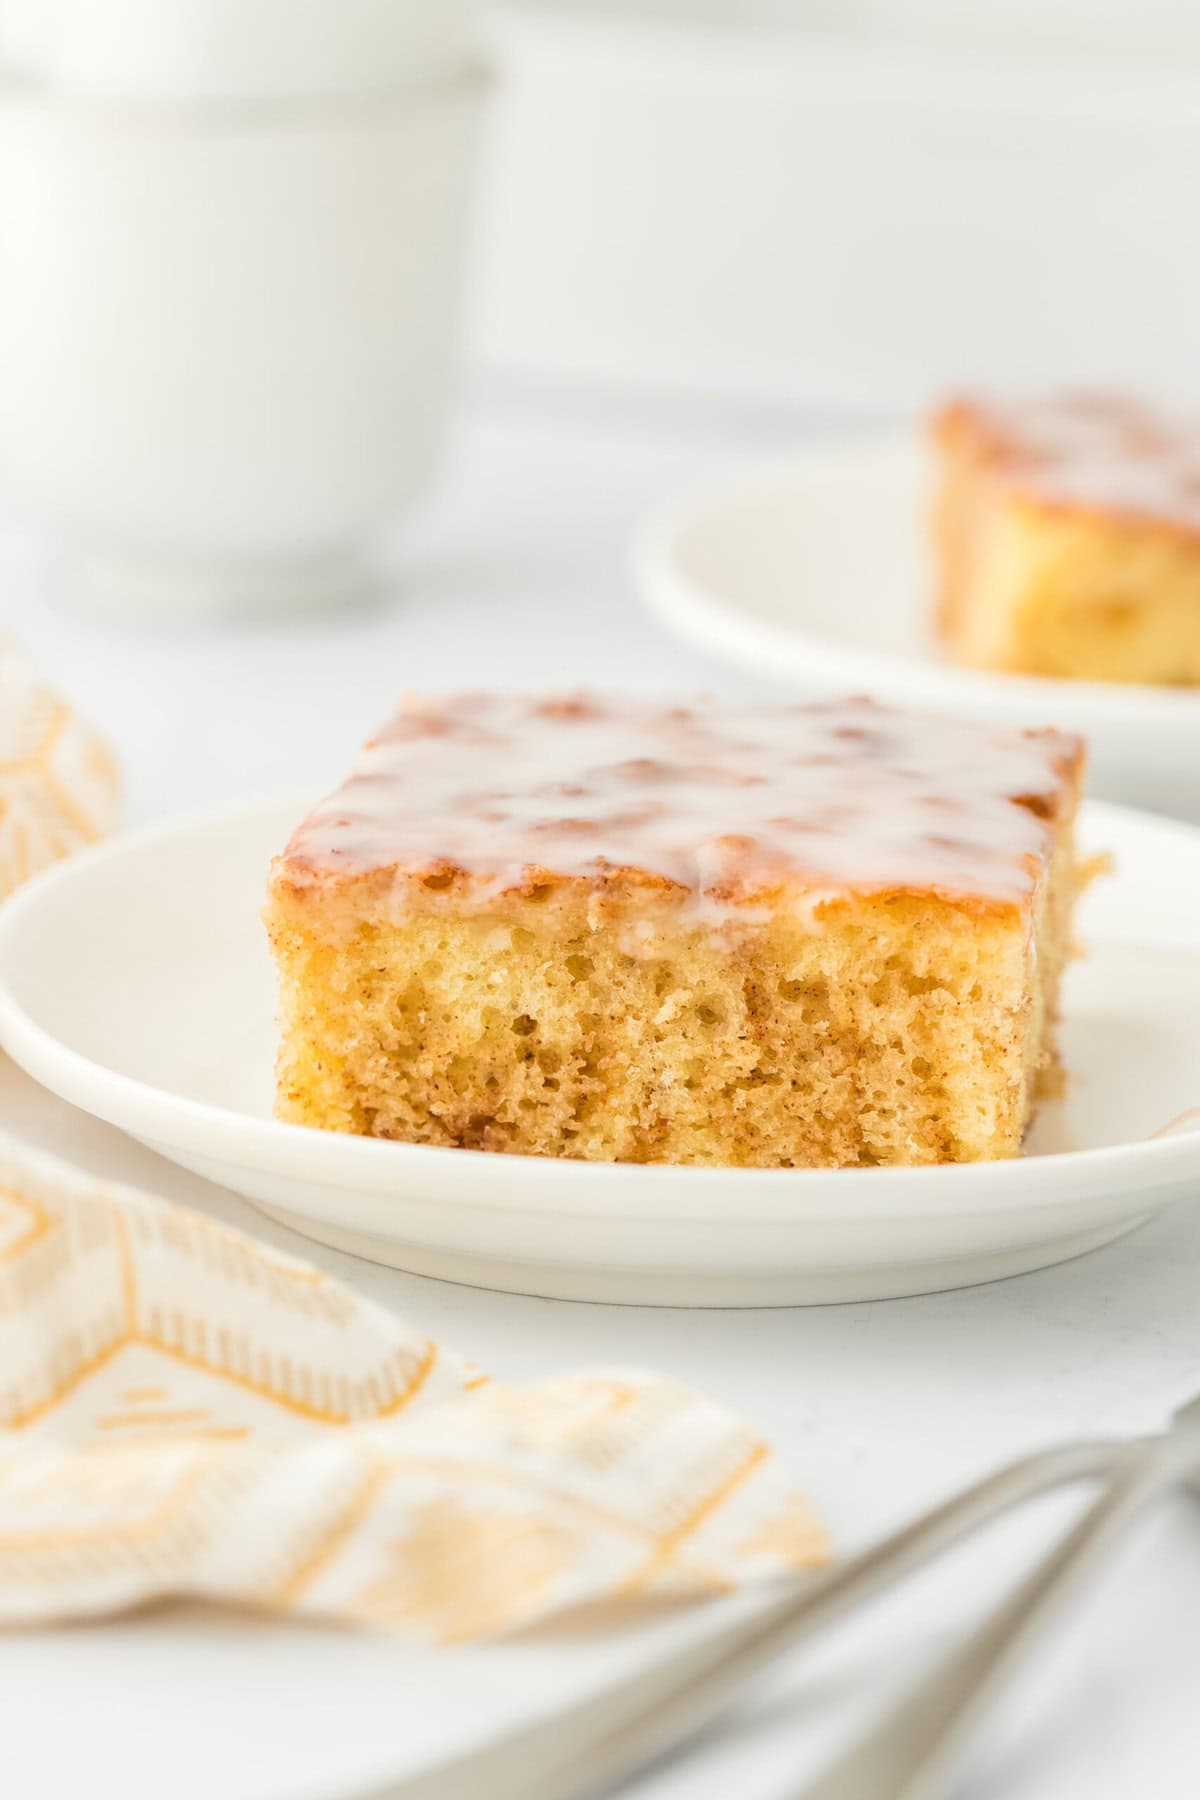 Two slices of honey bun cake recipe on white plates against a white background